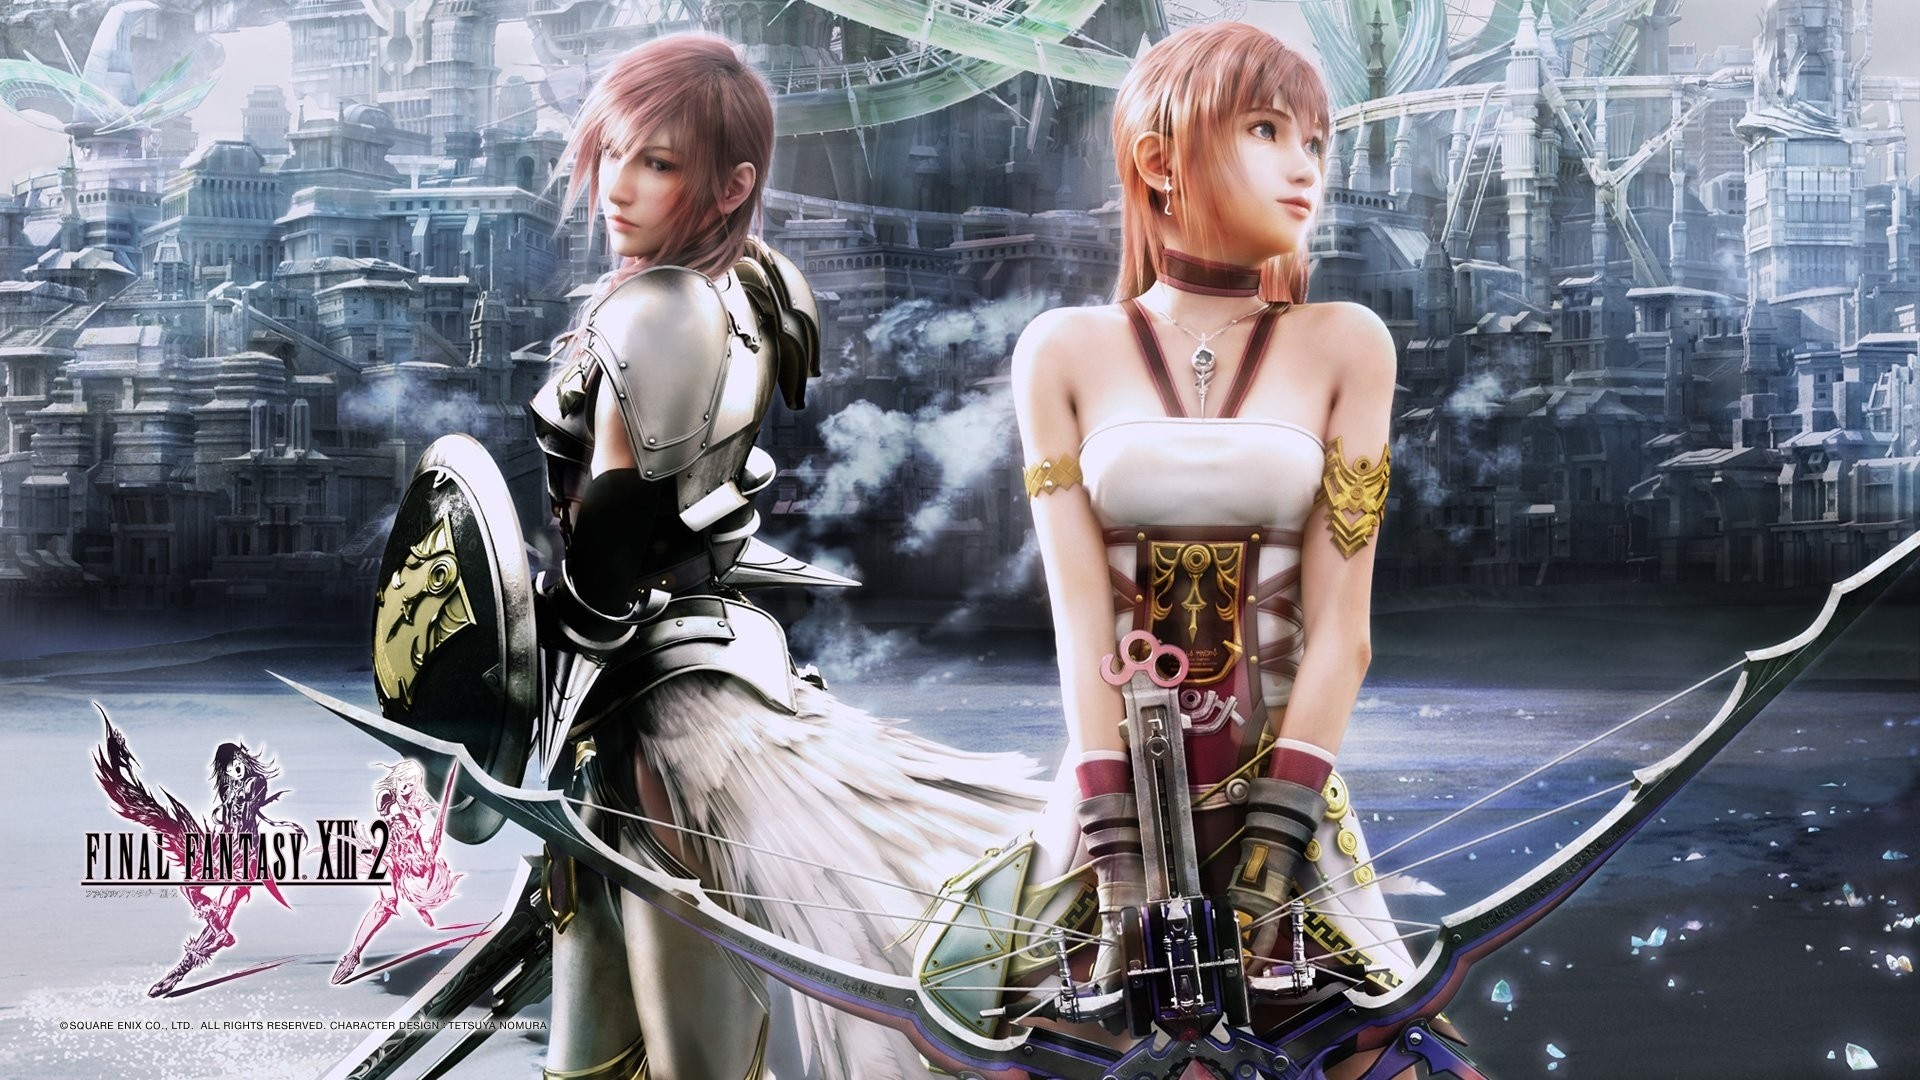 1920x1080 10 New And Latest Final Fantasy Xiii-2 Wallpaper for Desktop Computer with  FULL HD 1080p (1920 Ã 1080) FREE DOWNLOAD